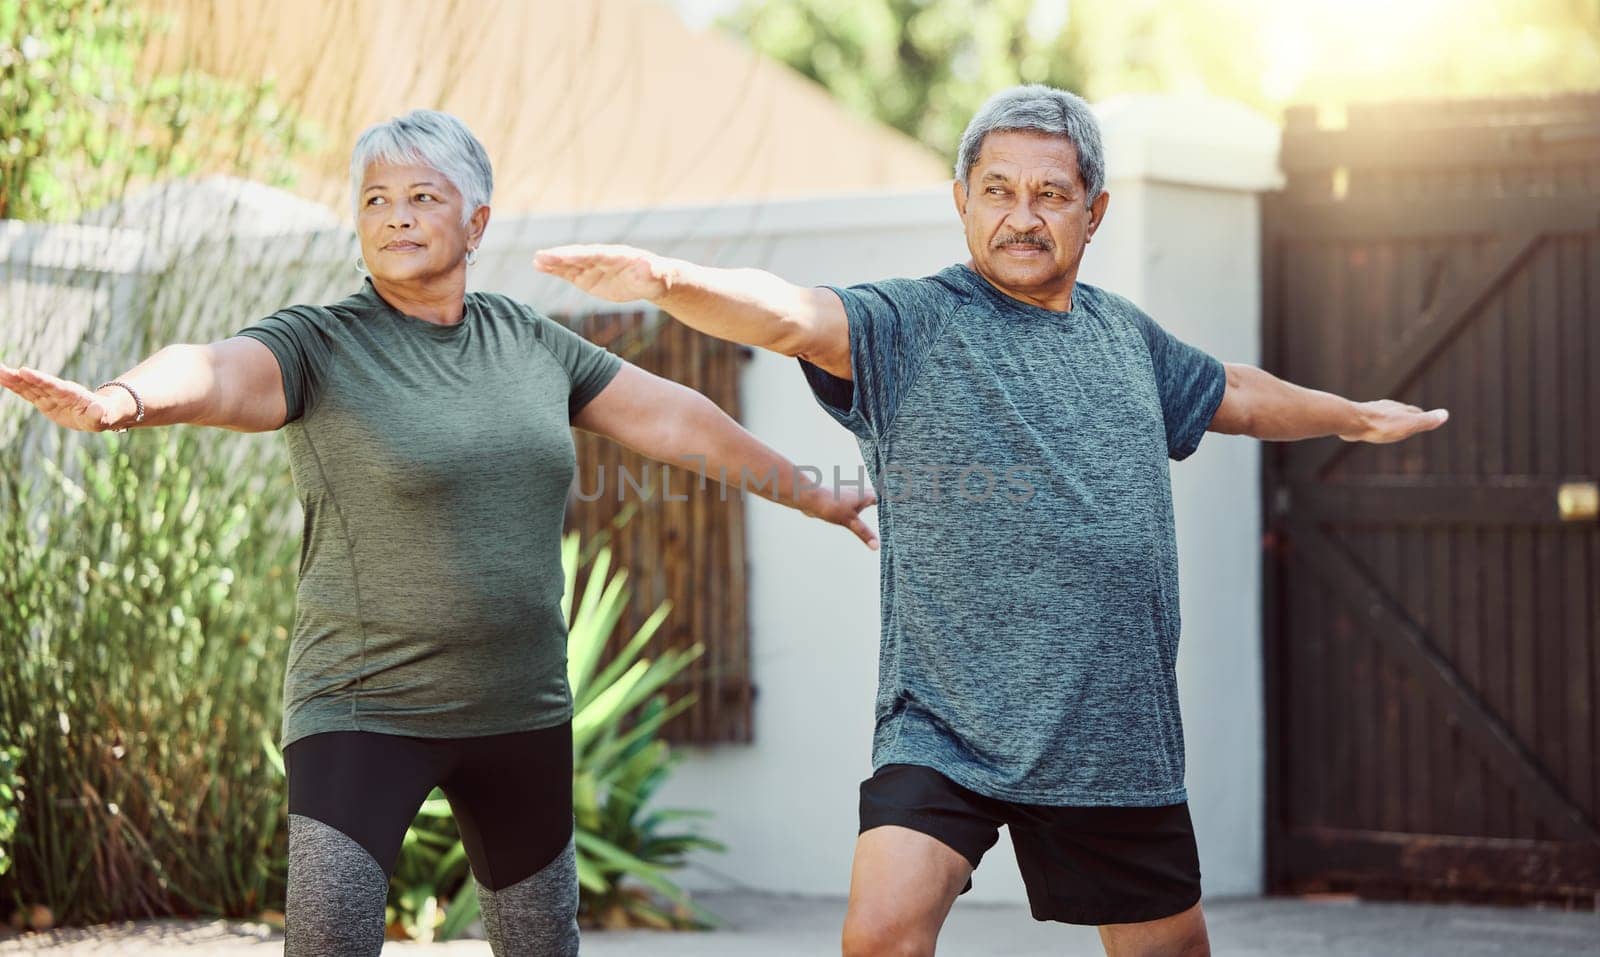 Exercise, yoga and health with a senior couple outdoor in their garden for a workout during retirement. Fitness, pilates and lifestyle with a mature man and woman training together in their backyard by YuriArcurs